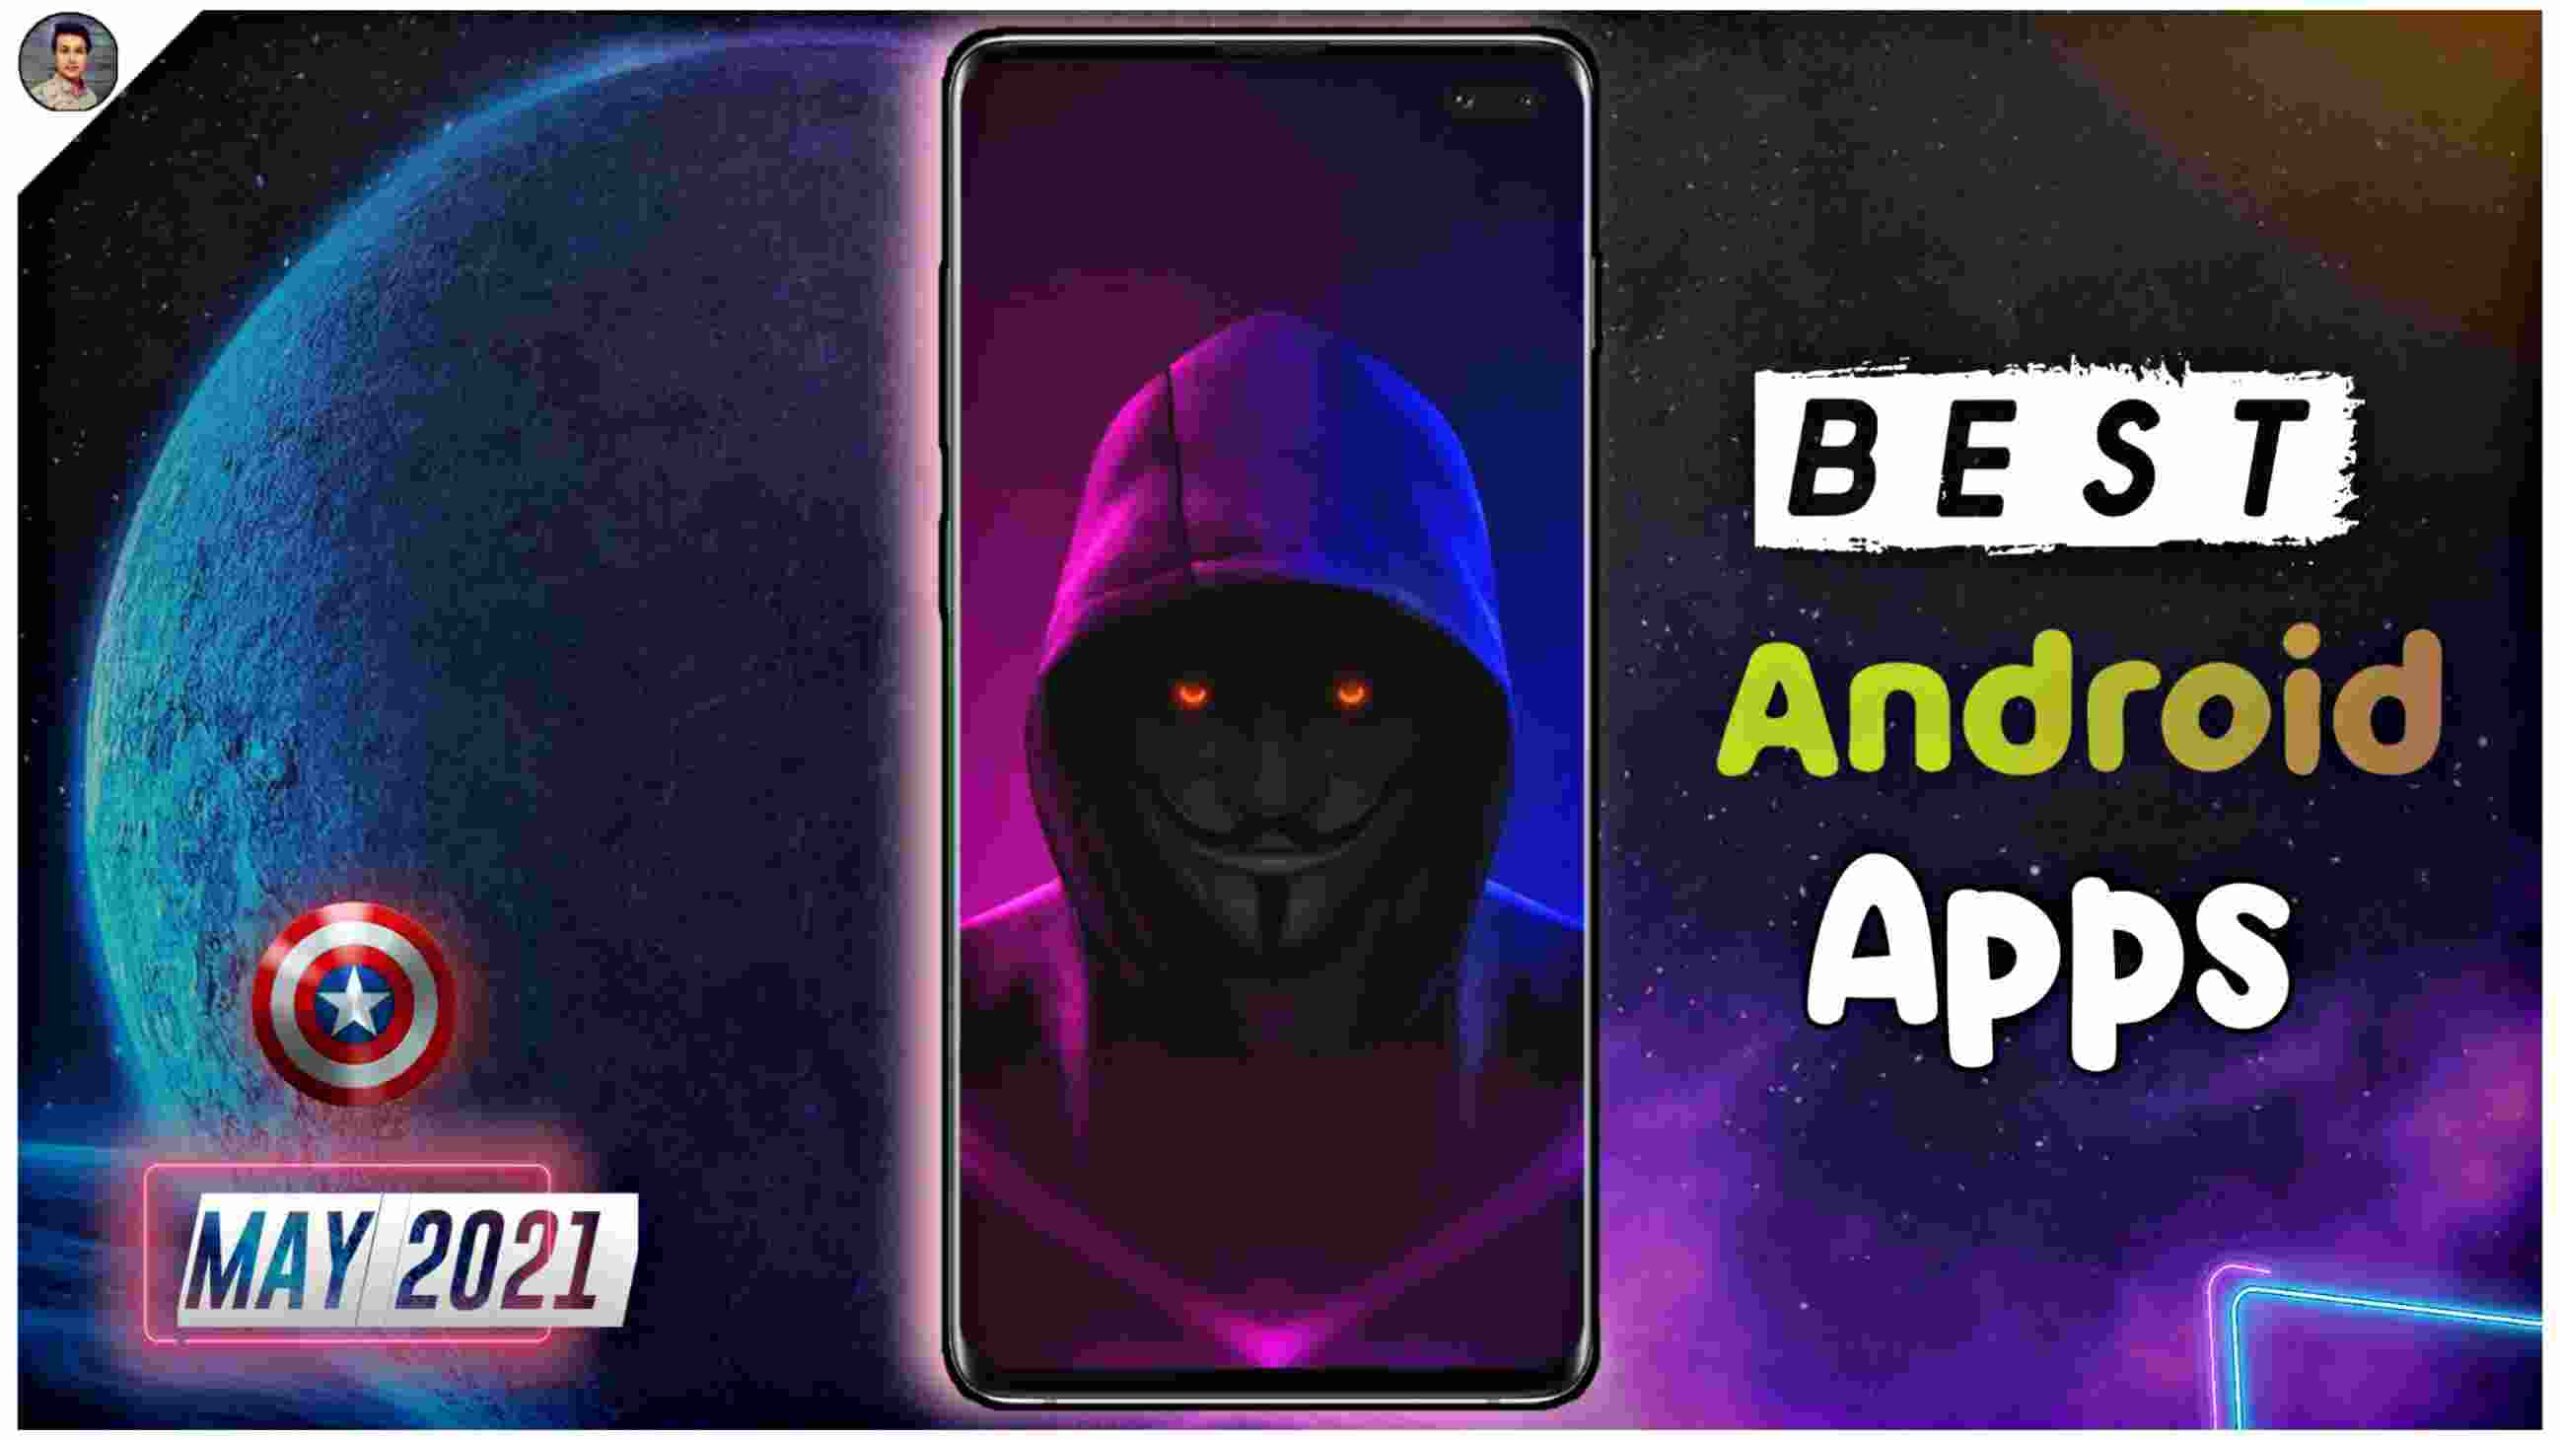 You are currently viewing Amazing Android Apps | Best Android Apps May 2021